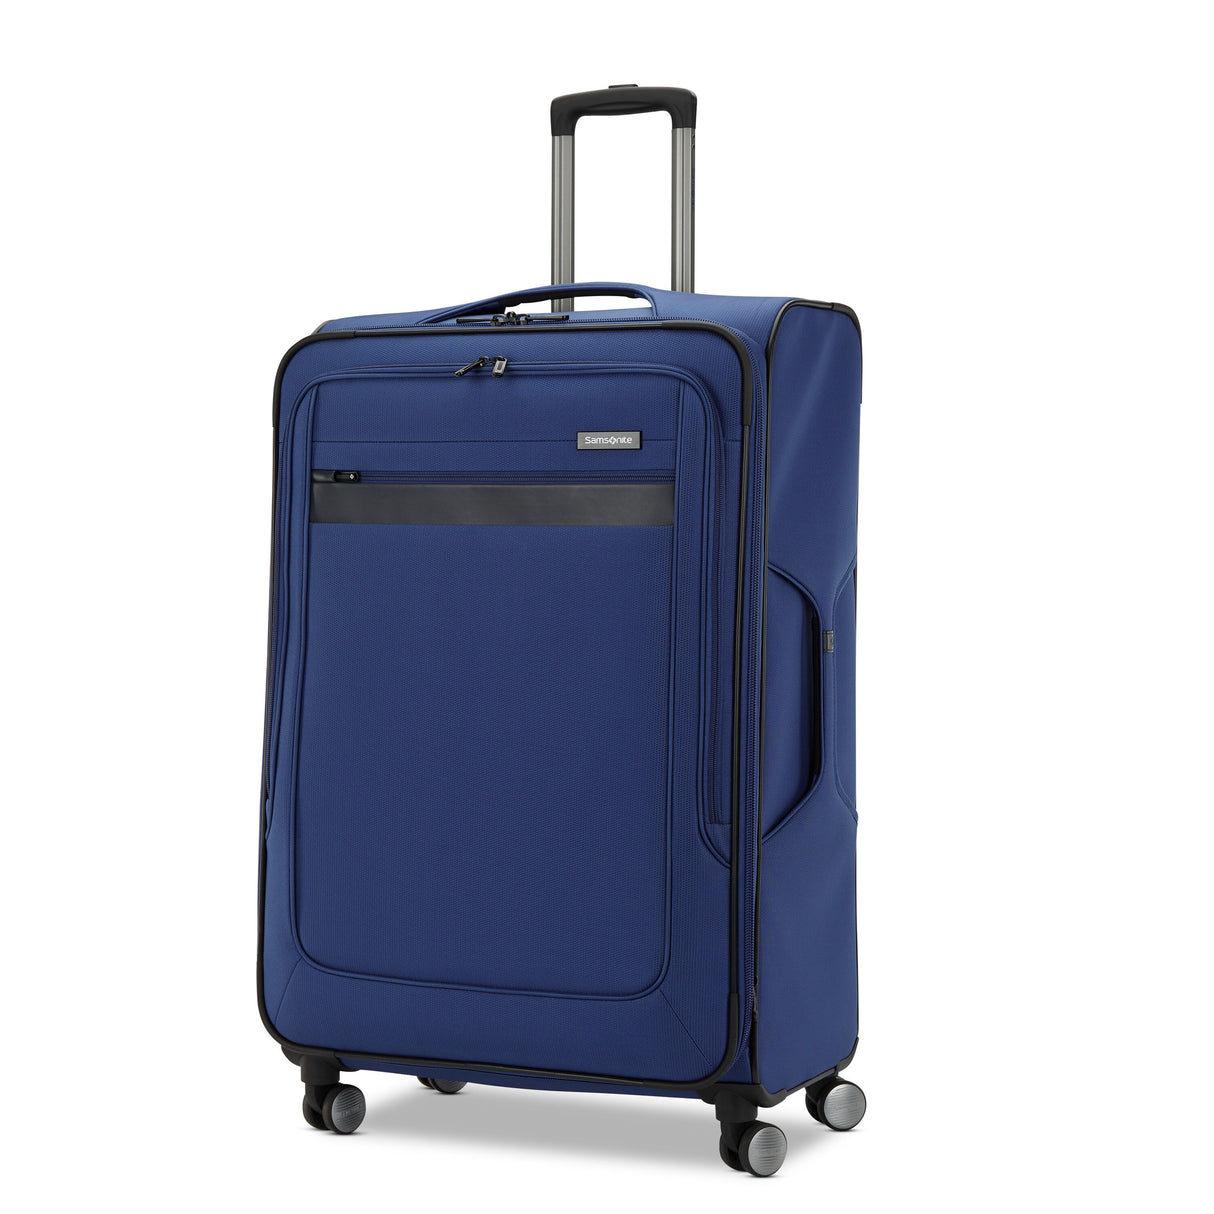 Samsonite Ascella 3.0 Large Expandable Spinner , Sapphire Blue , 1450550609_LgSpin_1_Front34